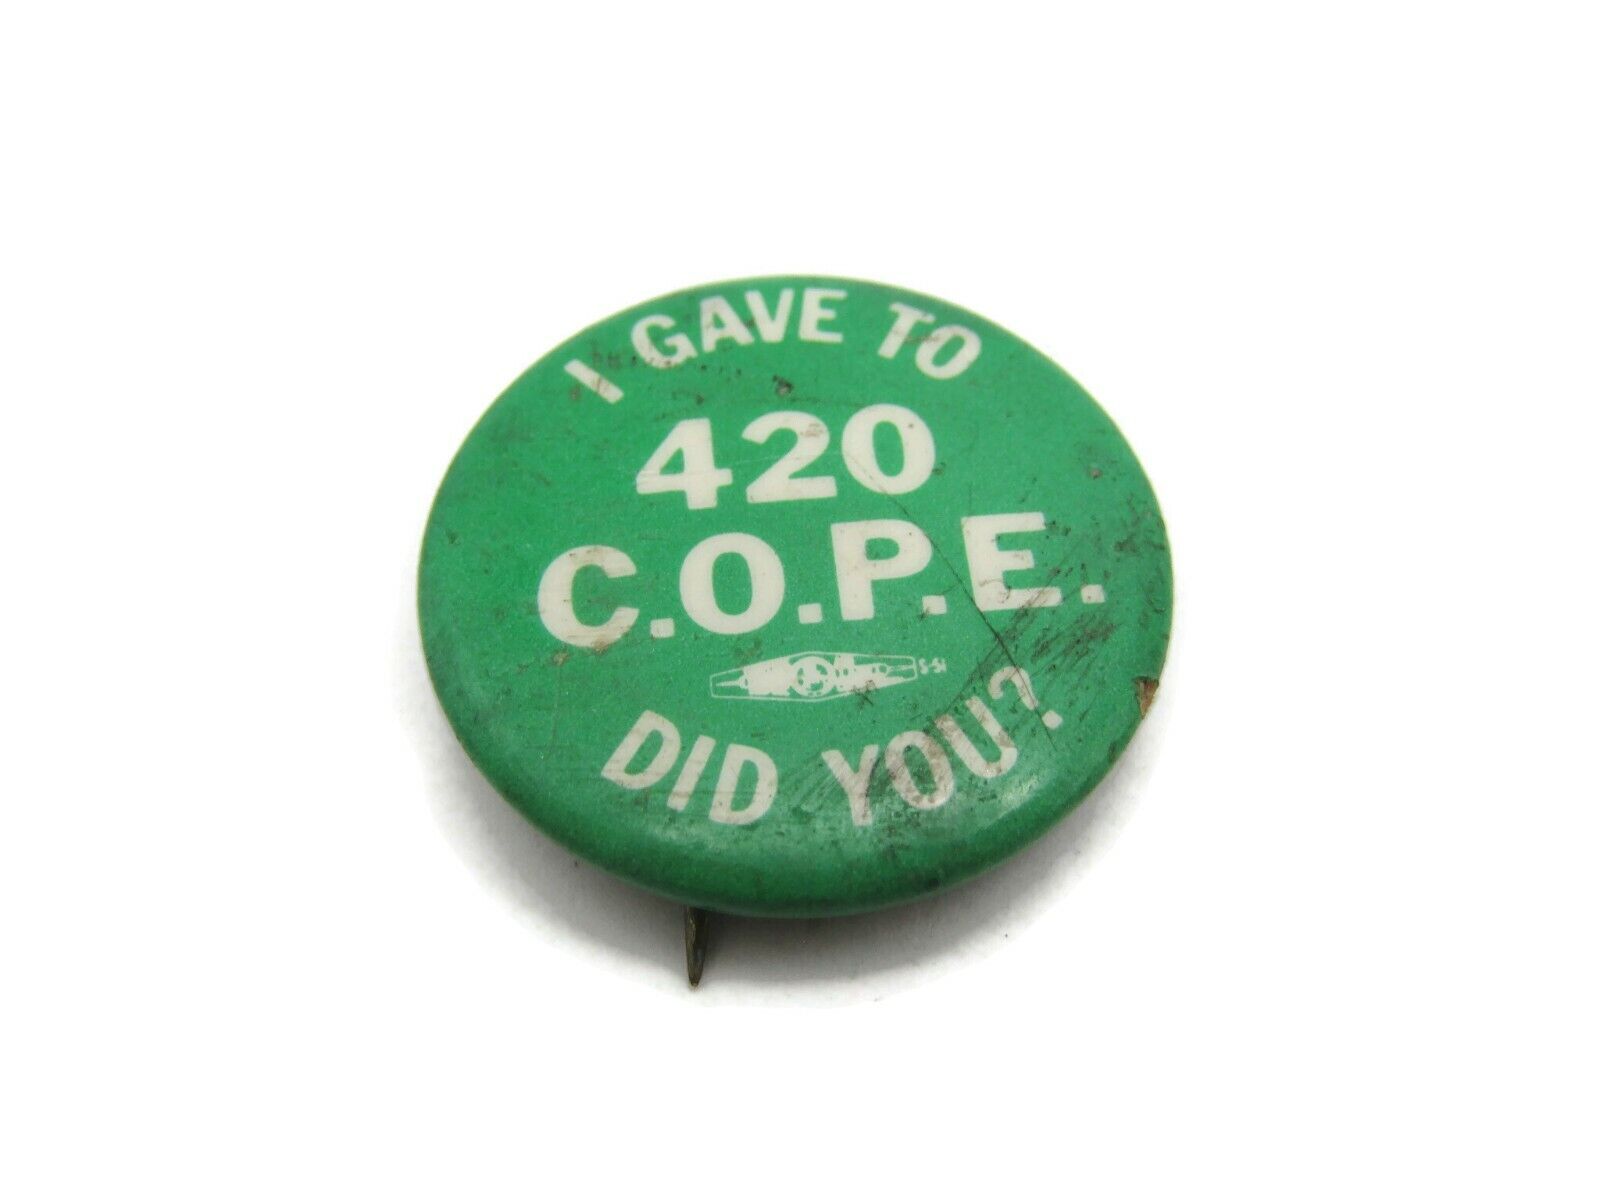 I Gave to 420 C.O.P.E. Did You? Pin Button Vintage Collectible